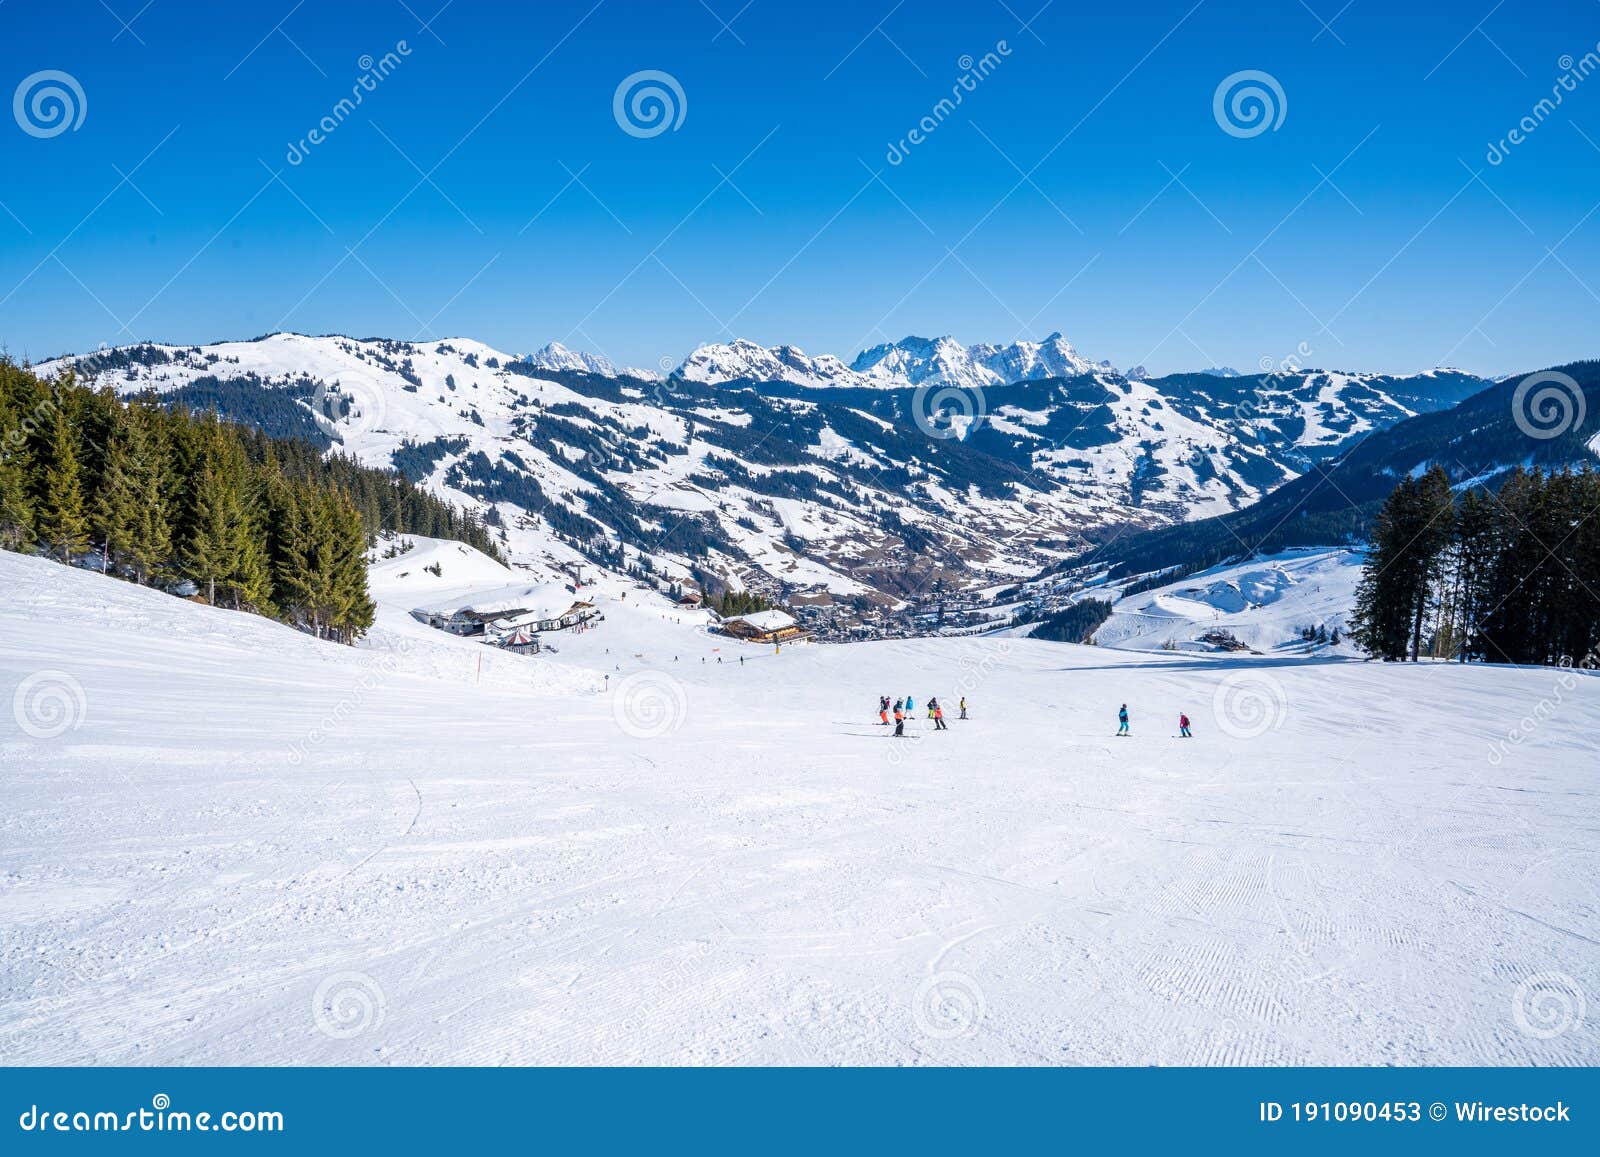 ski area on a slope of one of the mountains in saalbach-hinterglemm, austria